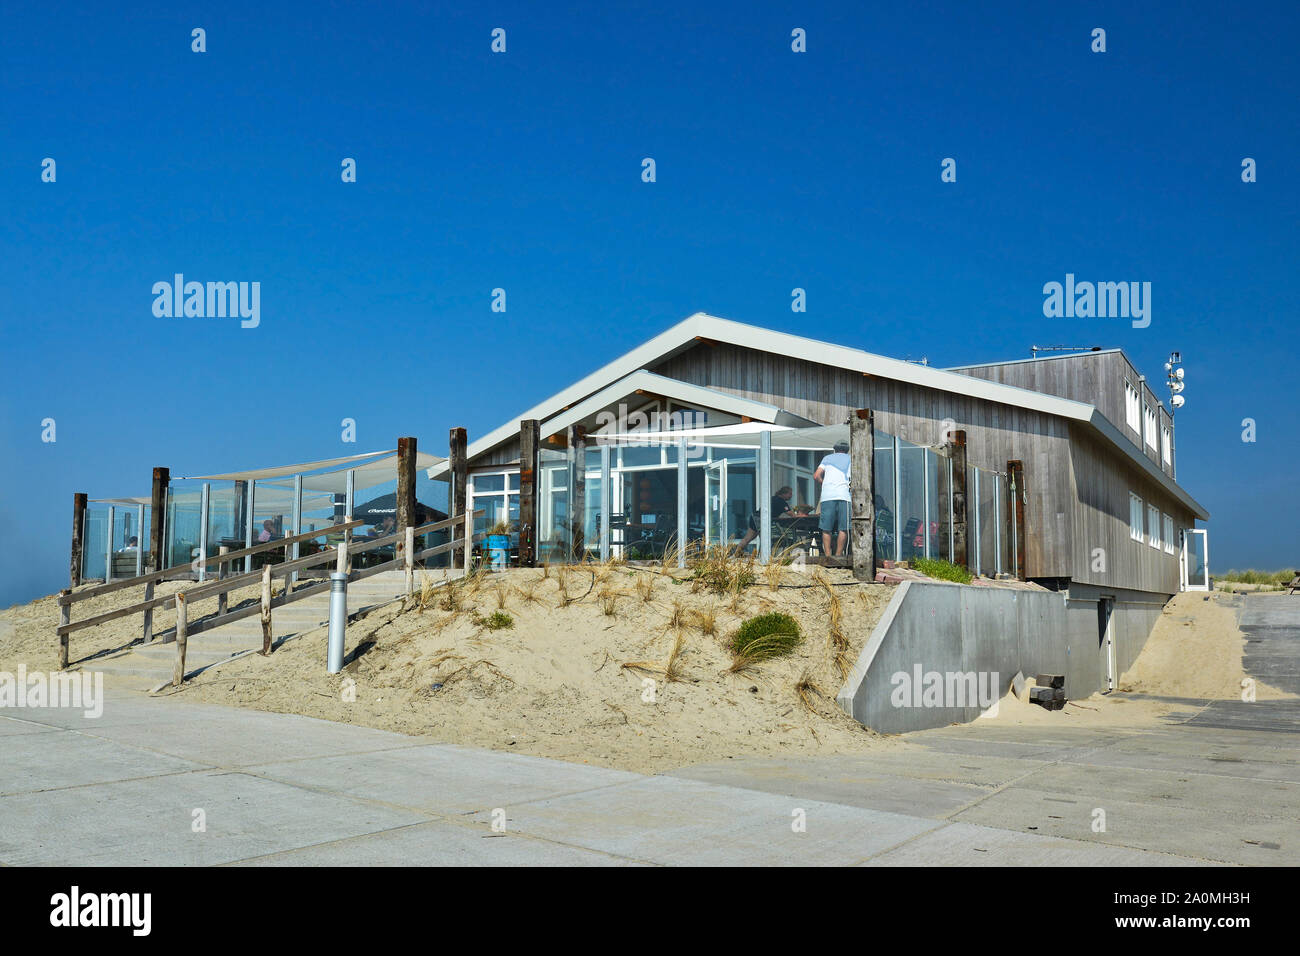 Texel, Netherlands - August 2019: Small beautiful wooden beach pavillon called 'Paal 9' on a summer day on island Texel in Netherlands Stock Photo